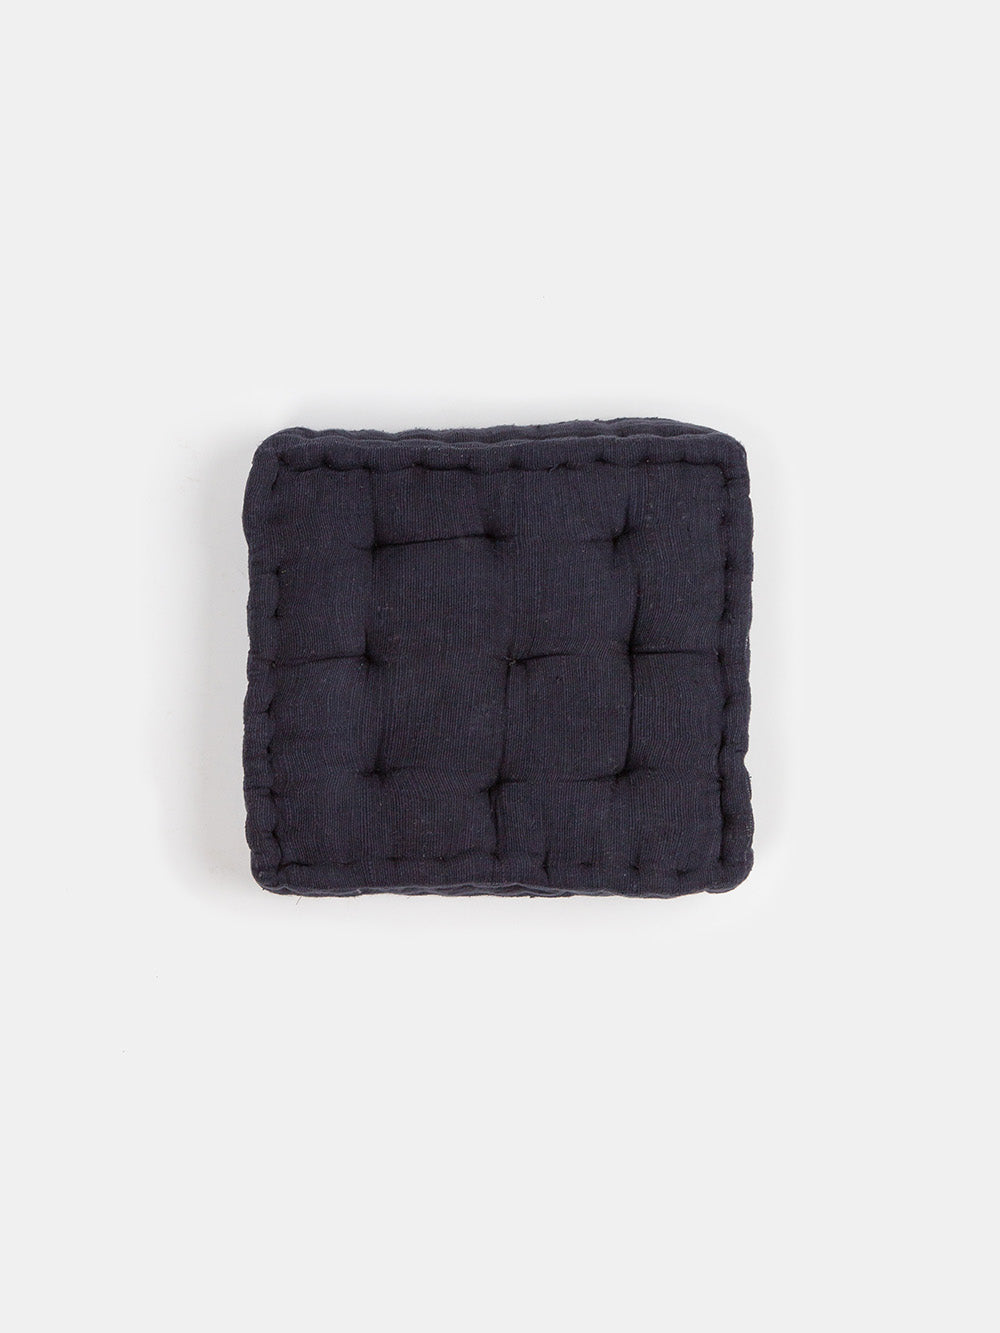 Khadi Cotton Hand Tufted Seat Cushion in Ink